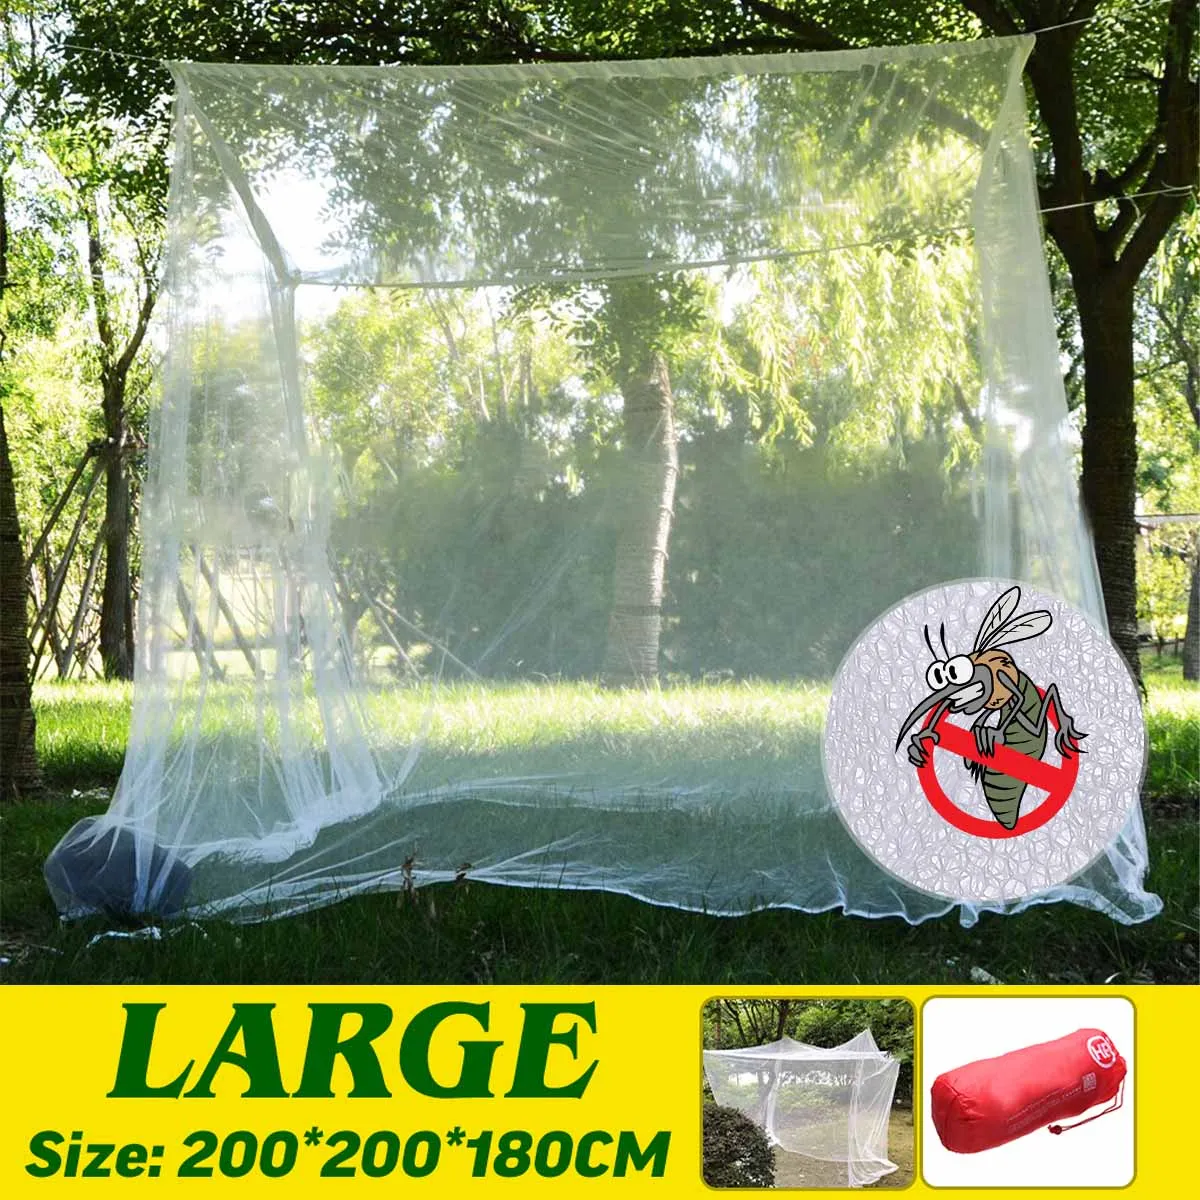 

Camping Anti Mosquito Net 2M Large Portable Travel Outdoor Storage Bag Insect Tent Household Repellent Tent Curtain Netting